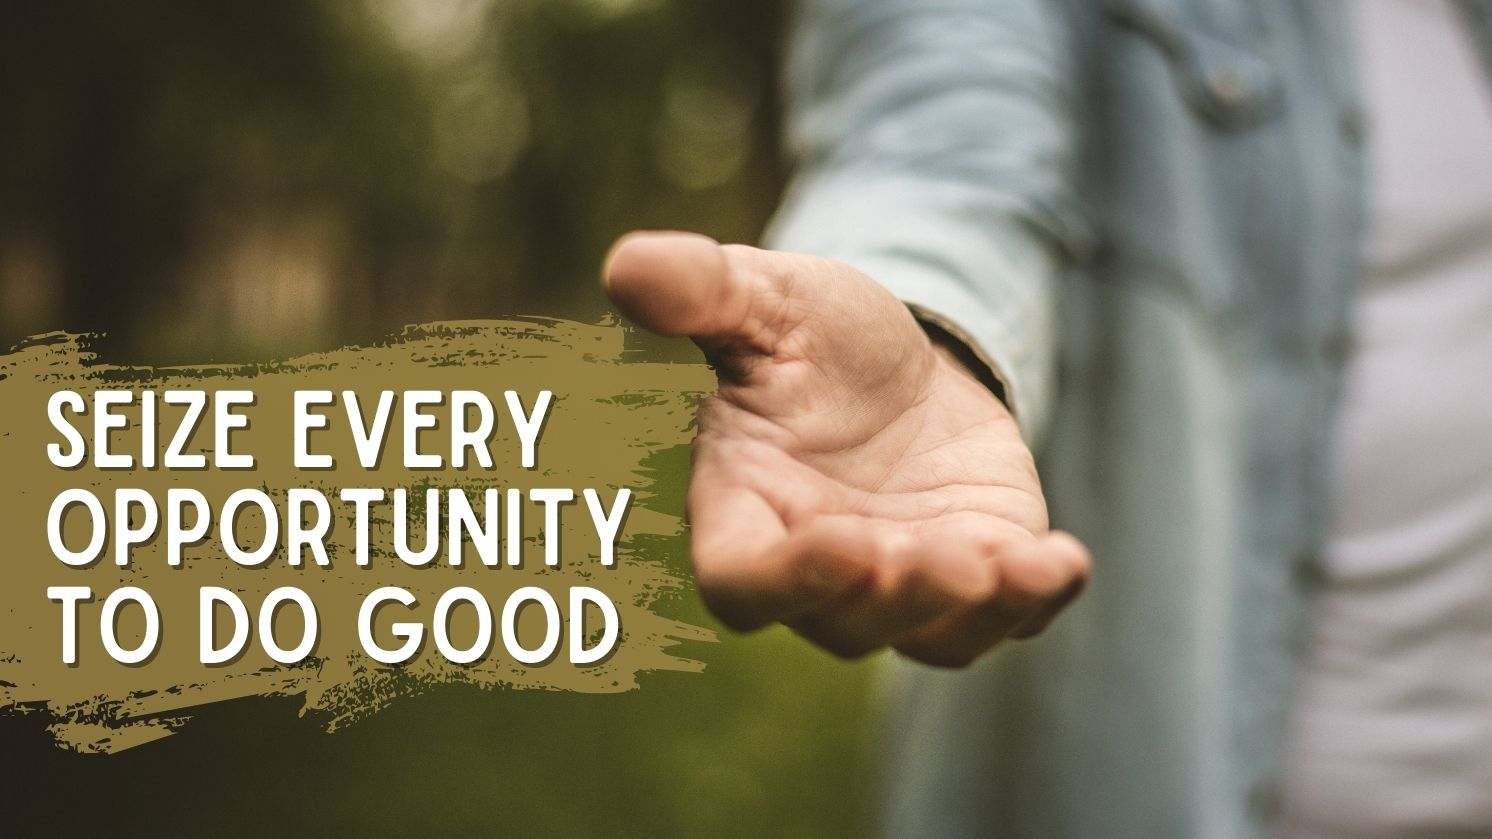 Seize Every Opportunity to Do Good